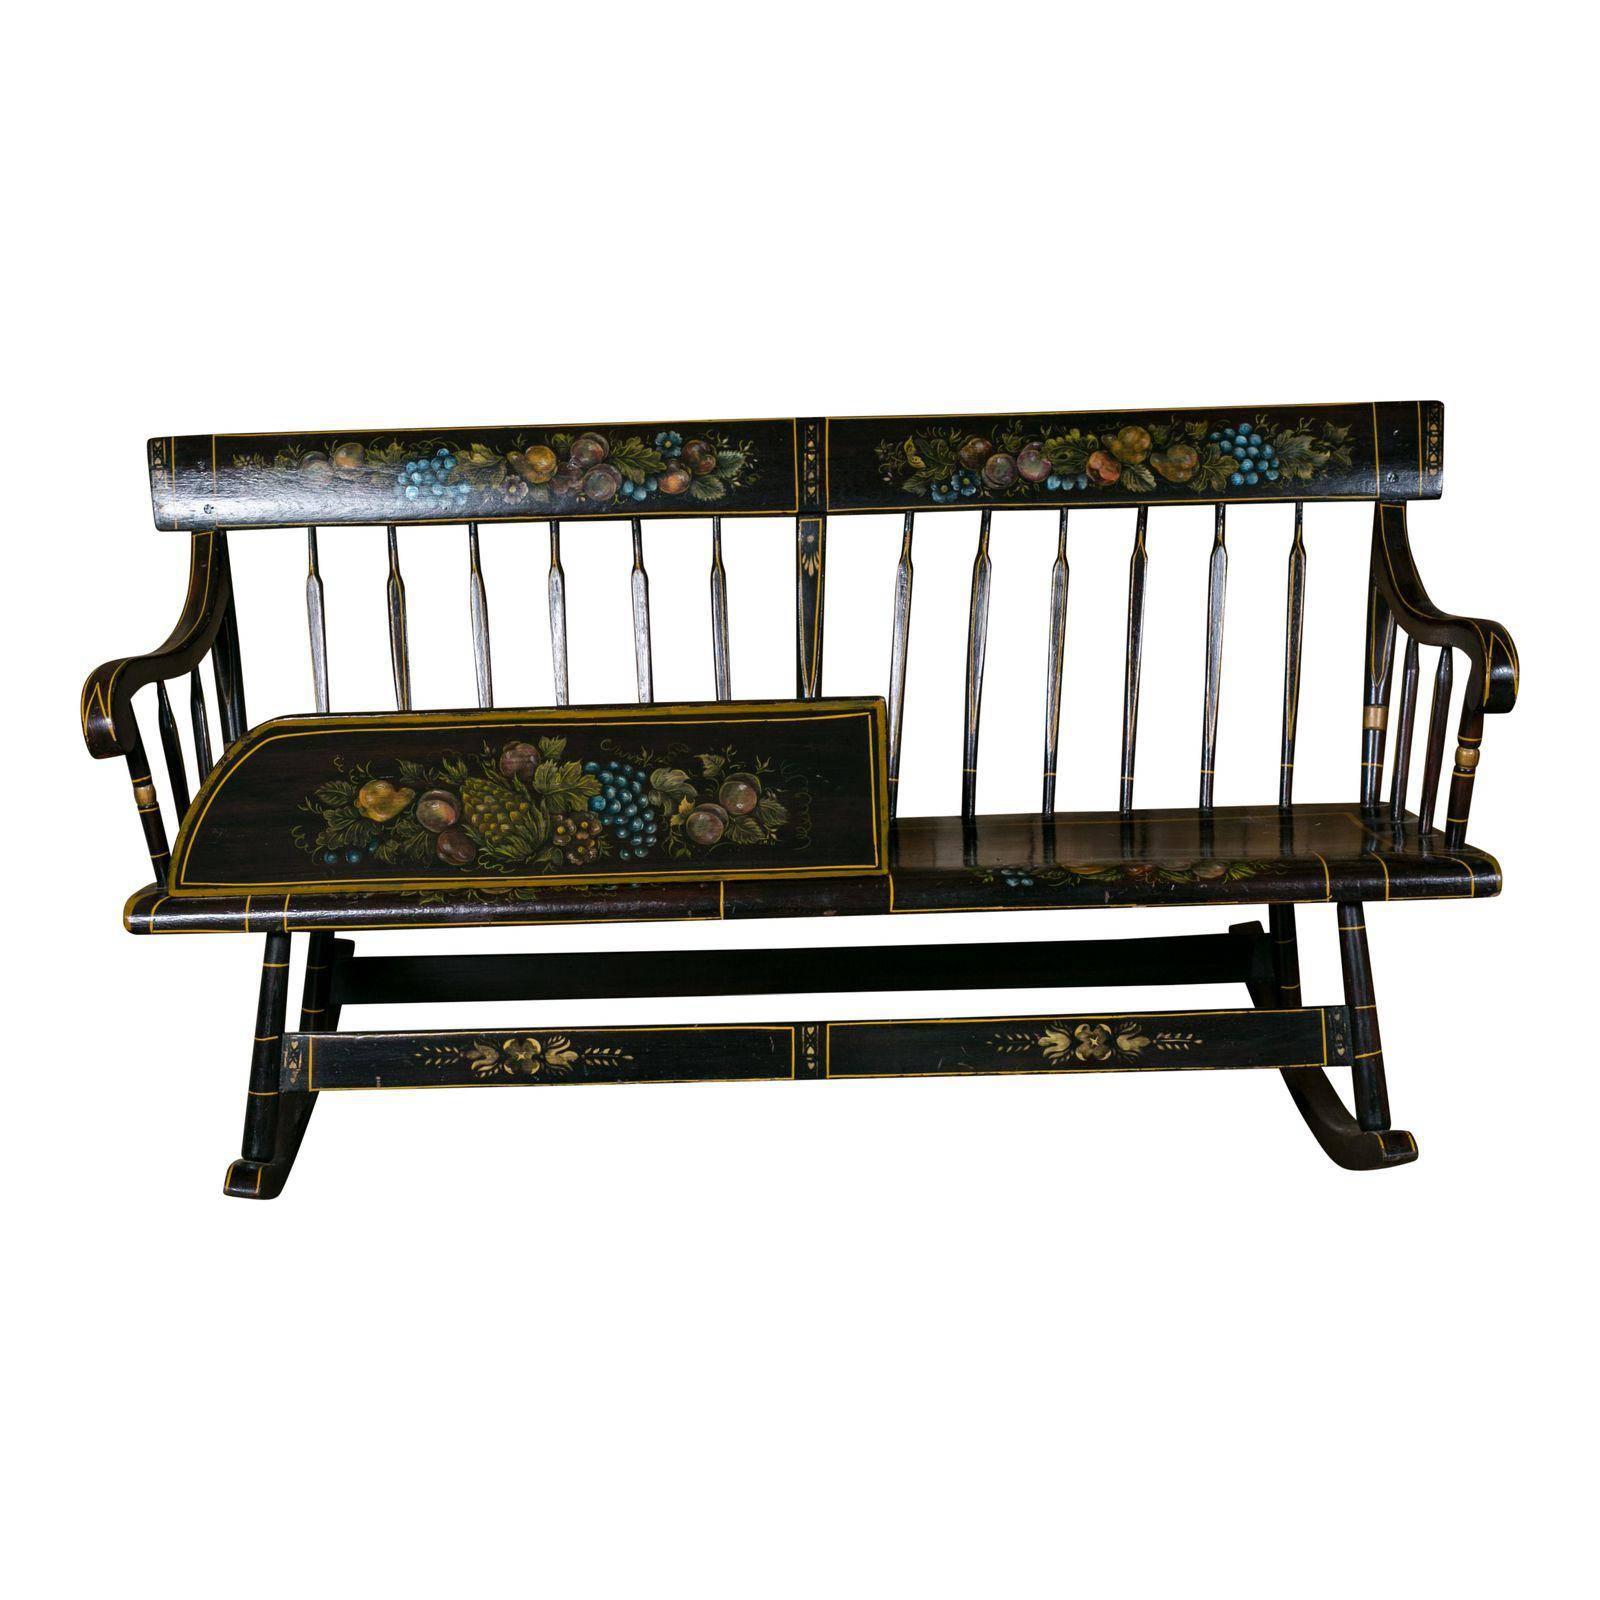 American Wooden Bench Rocker, circa 1890, Hand-Painted by Lew Hudnall